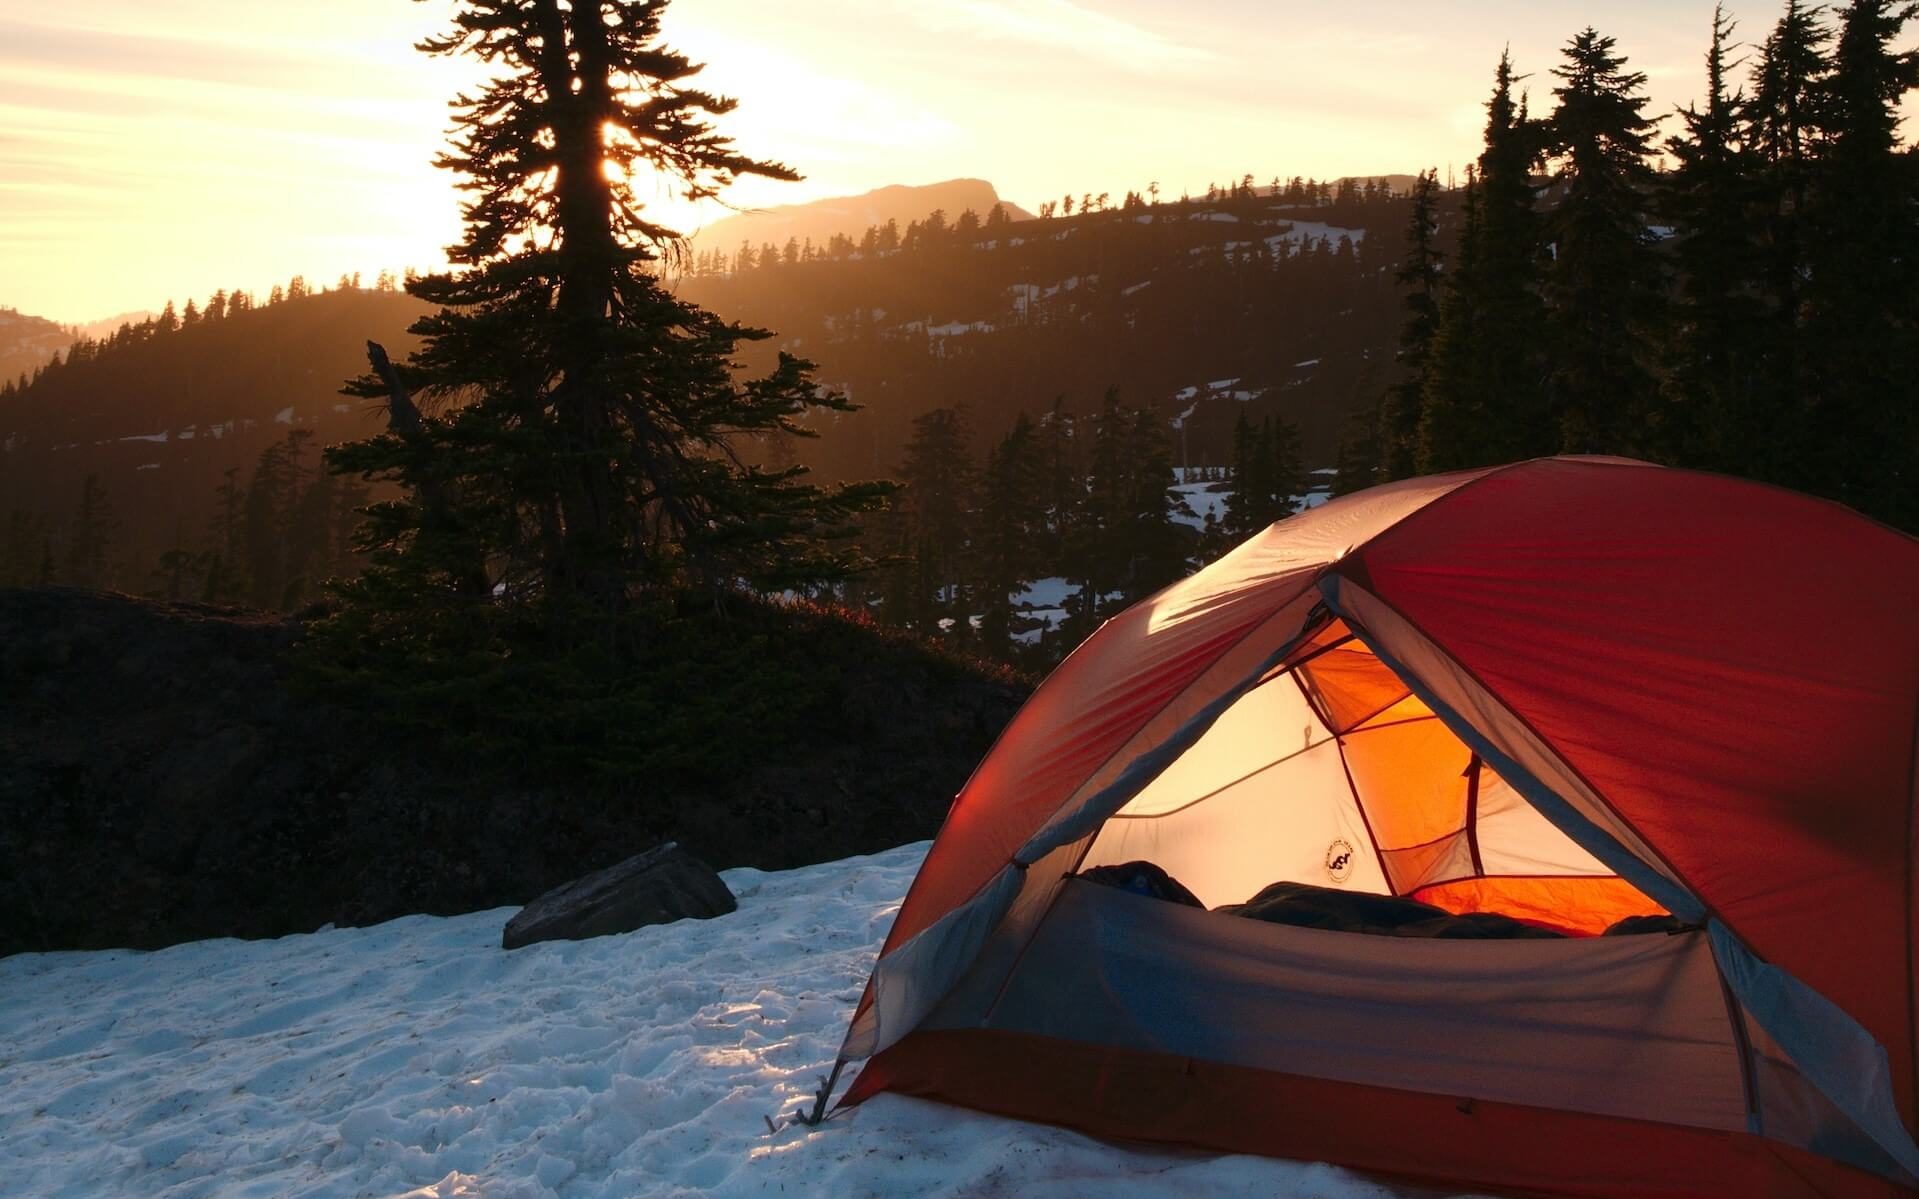 Tent set up in a snowy mountain landscape.